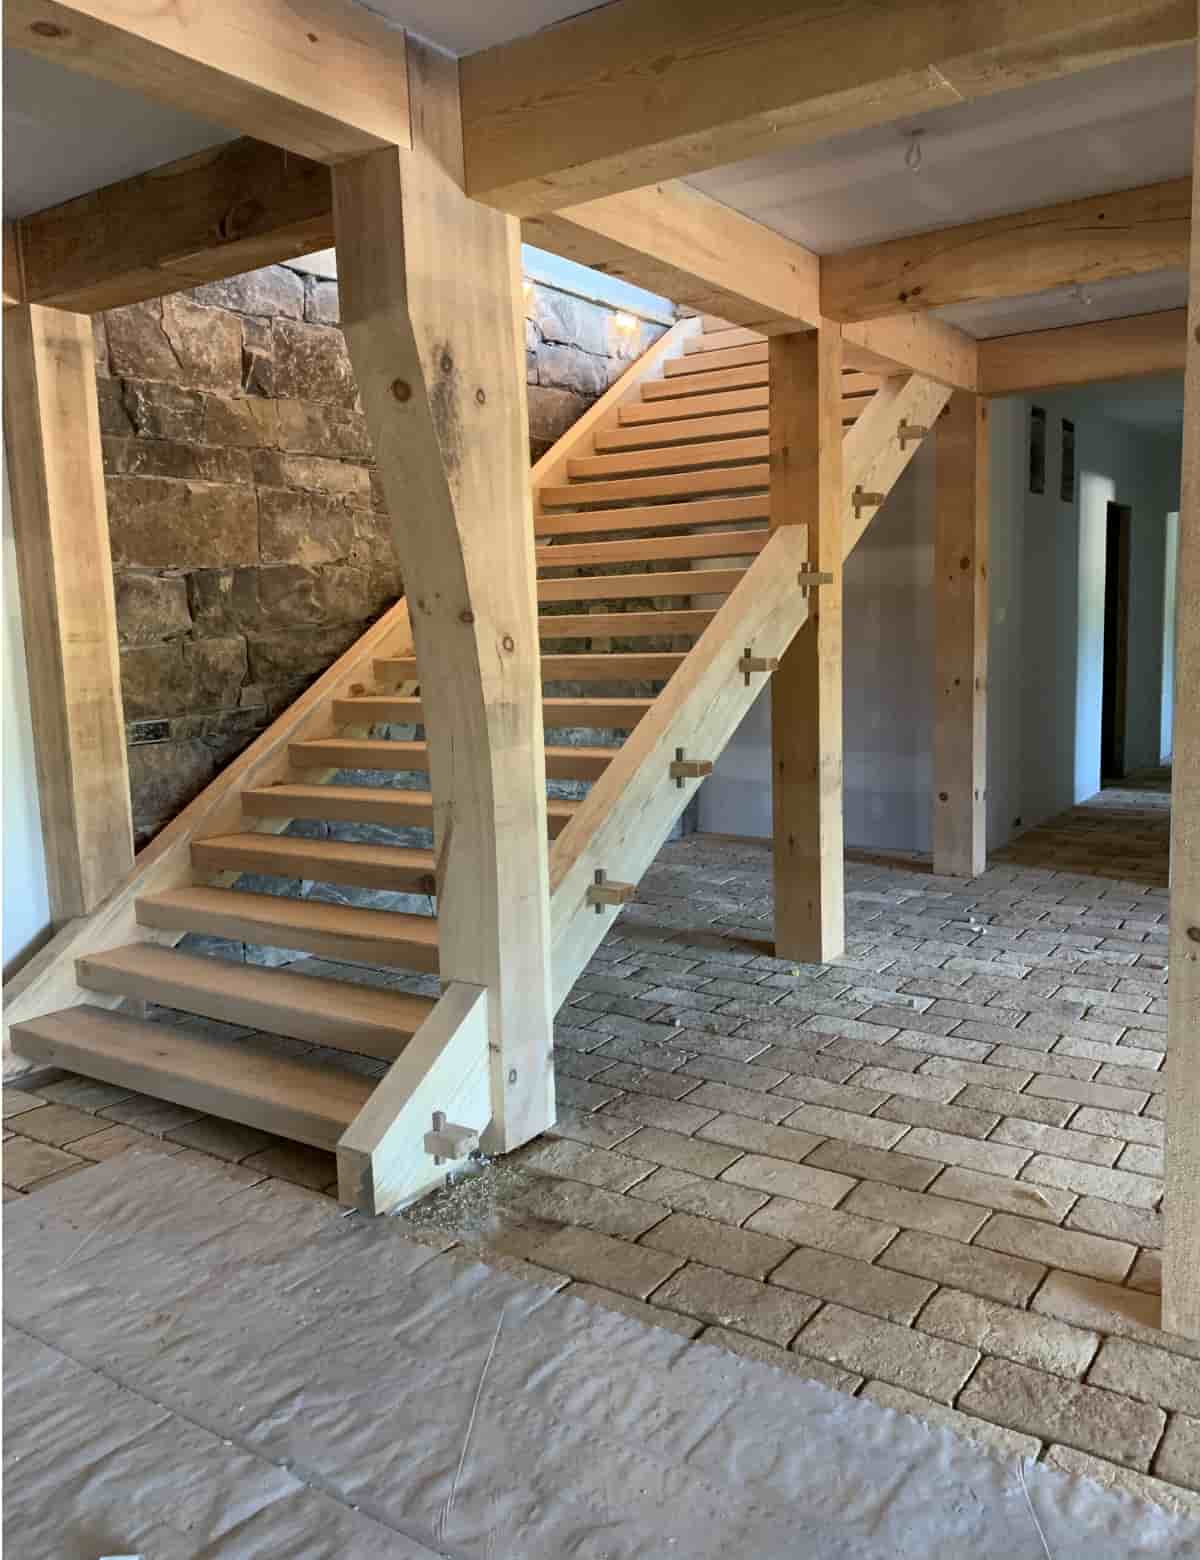 Timber framed staircase with through tenons